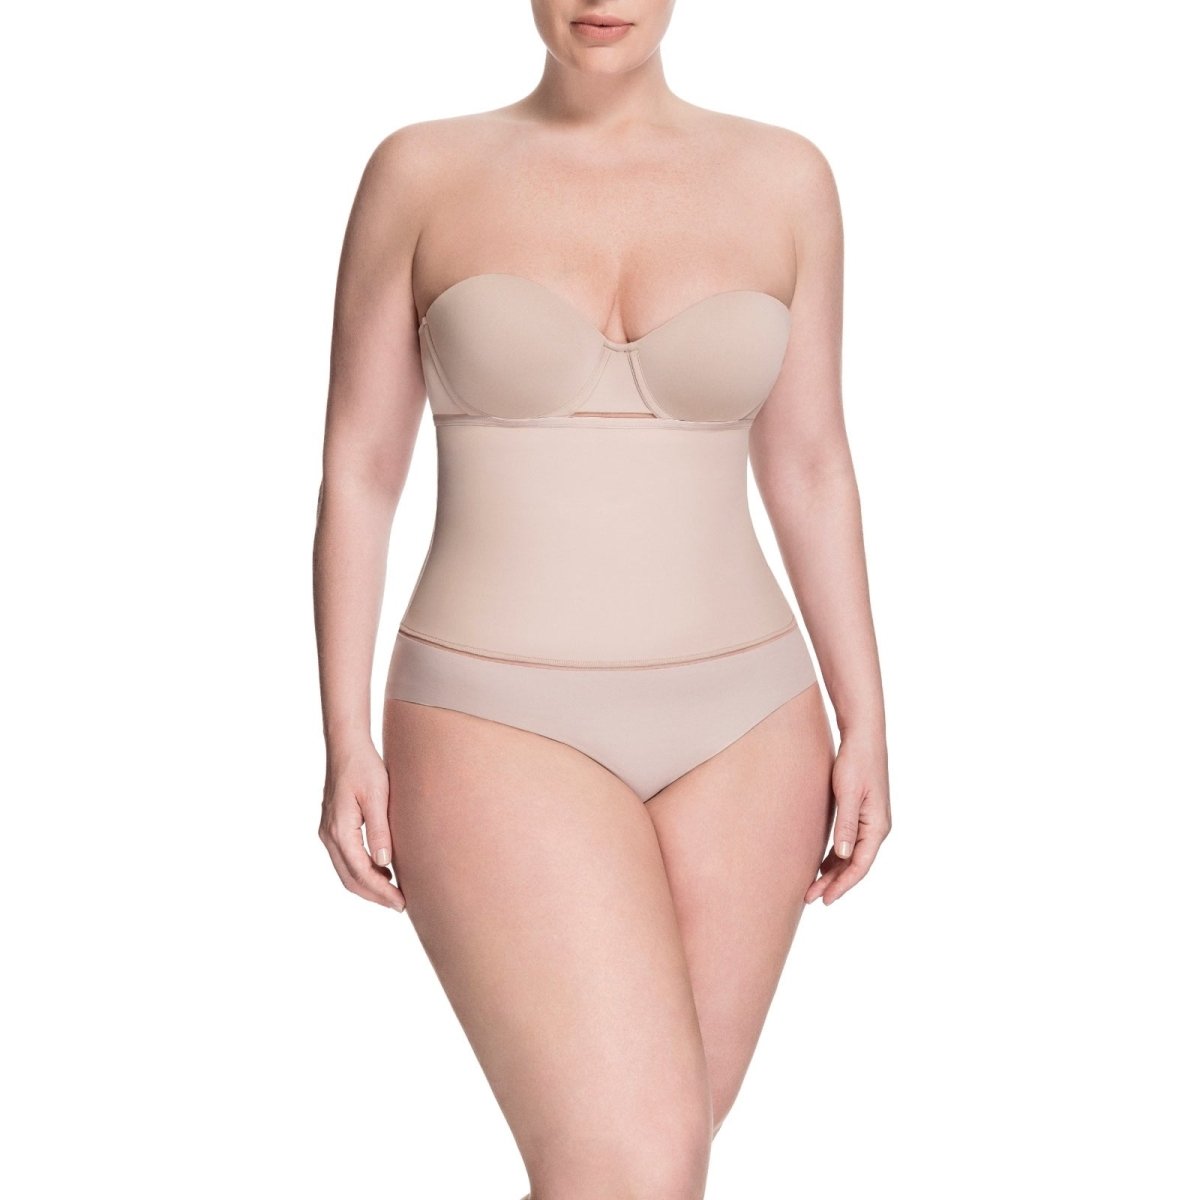 Squeem Perfect Waist Cincher Shapewear Review